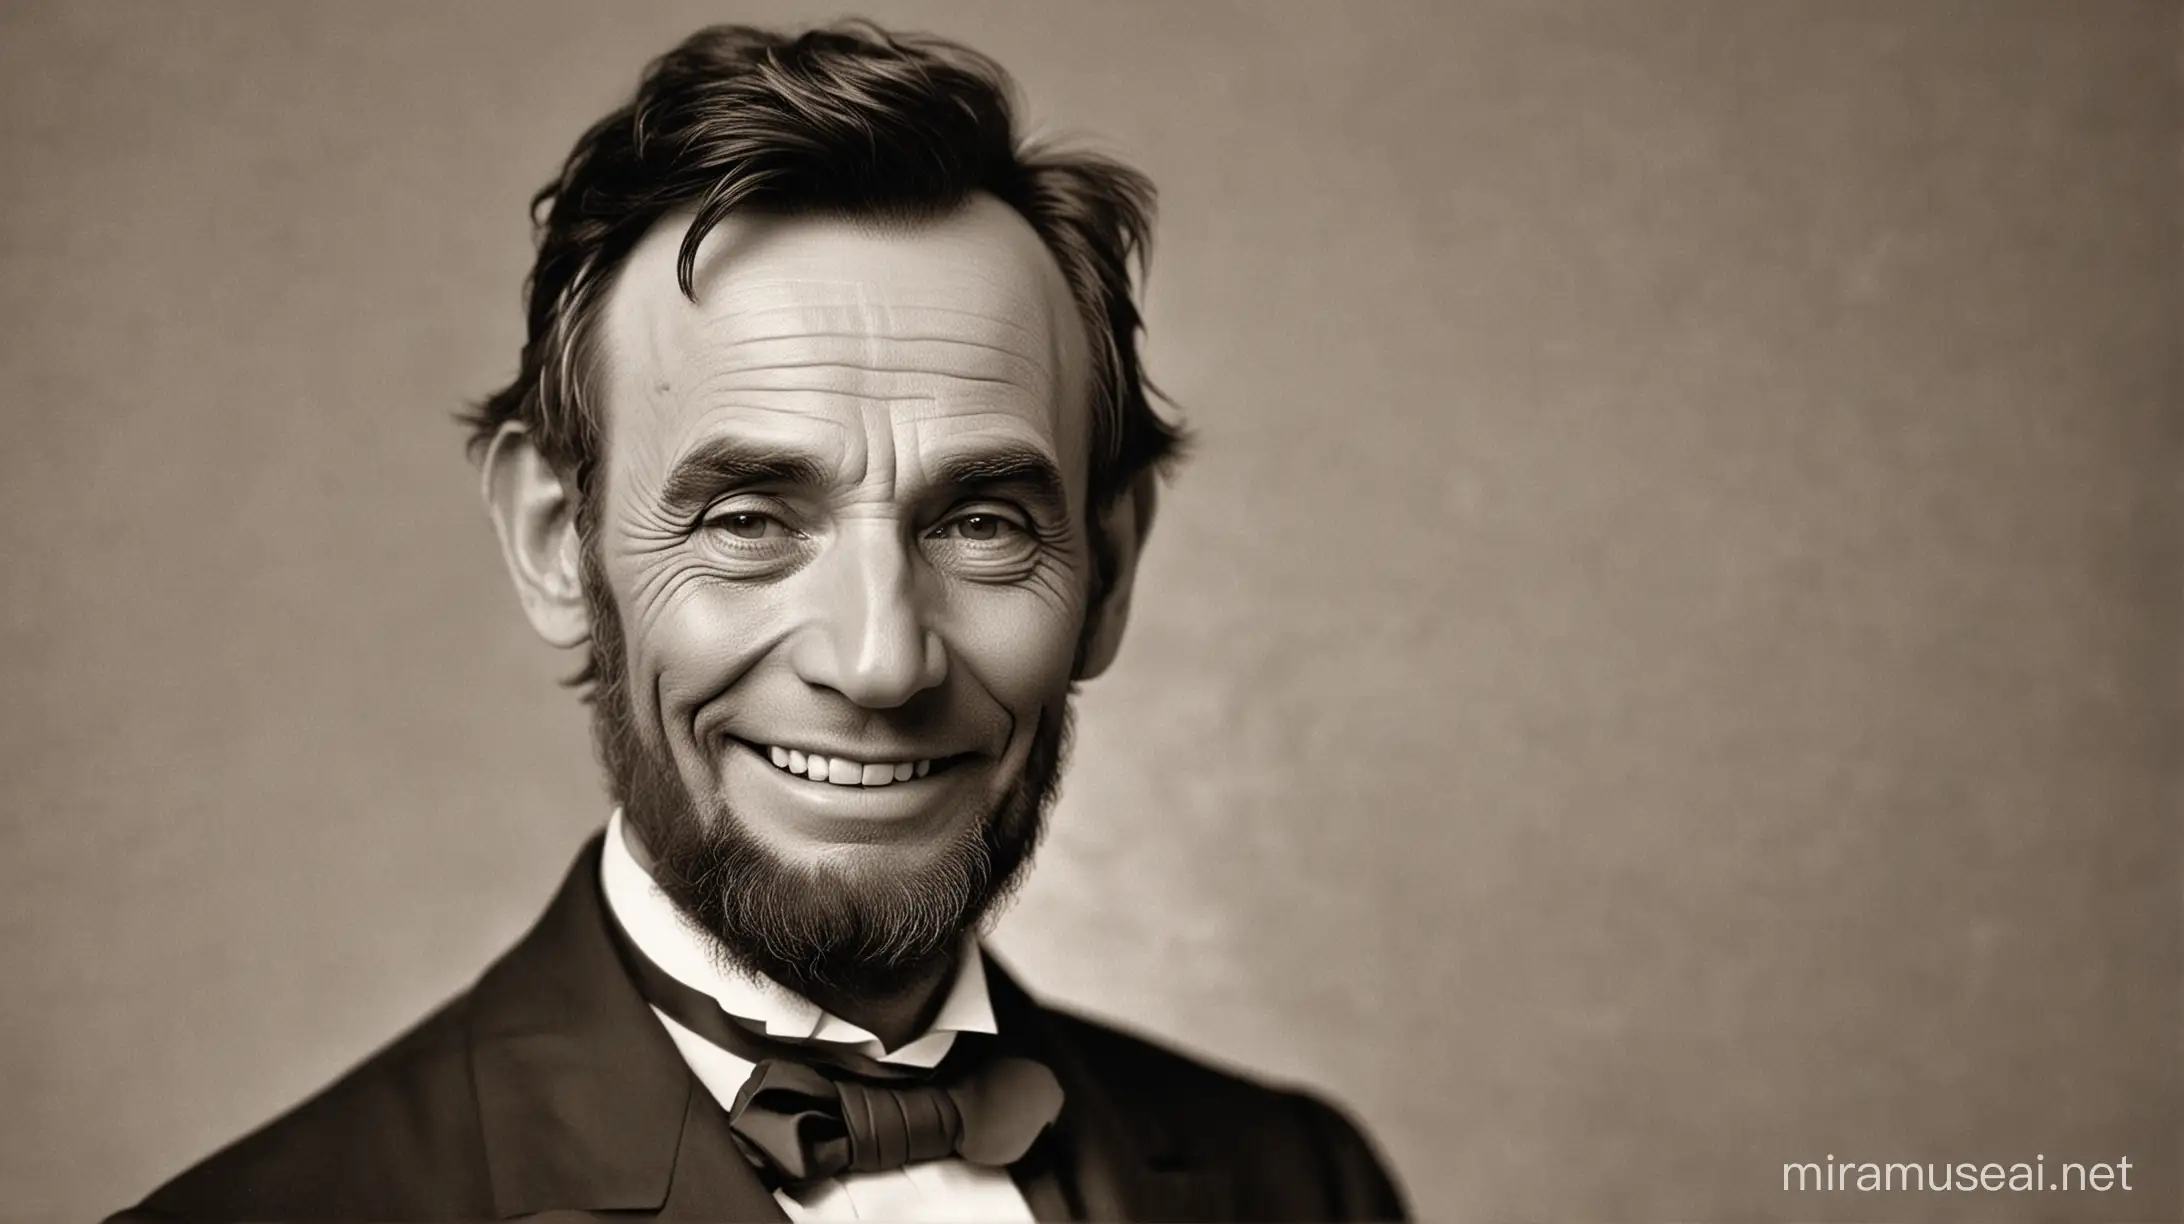 Historical Figure Abraham Lincoln Displaying a Warm Smile